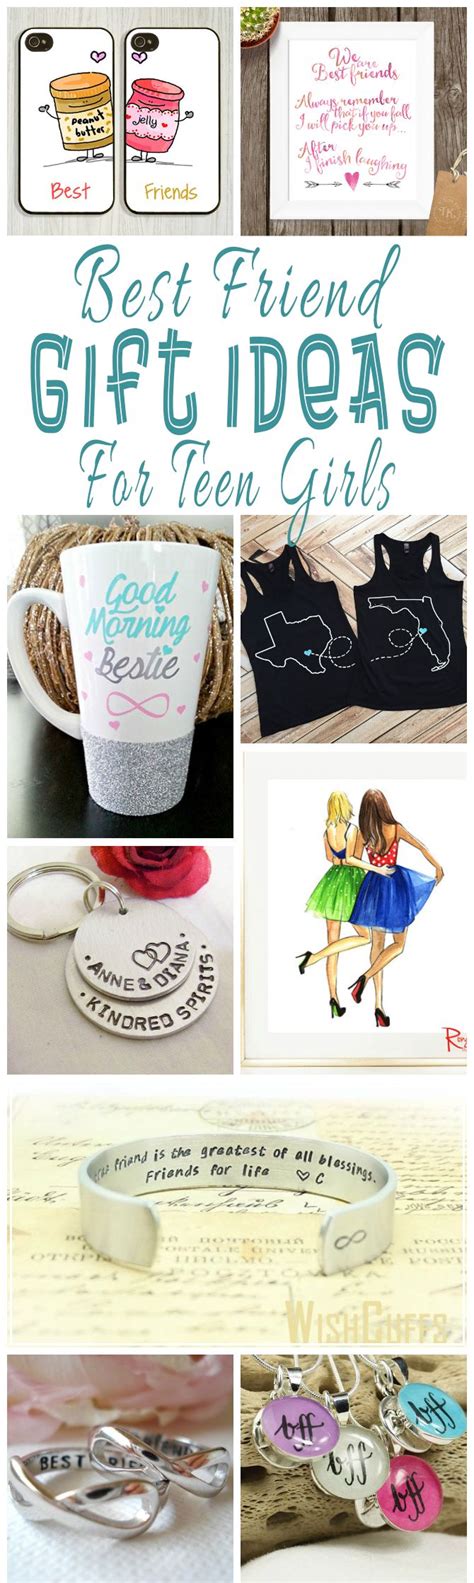 Through good times and bad, she's. Best Friend Gift Ideas For Teens | Best friend | Pinterest ...